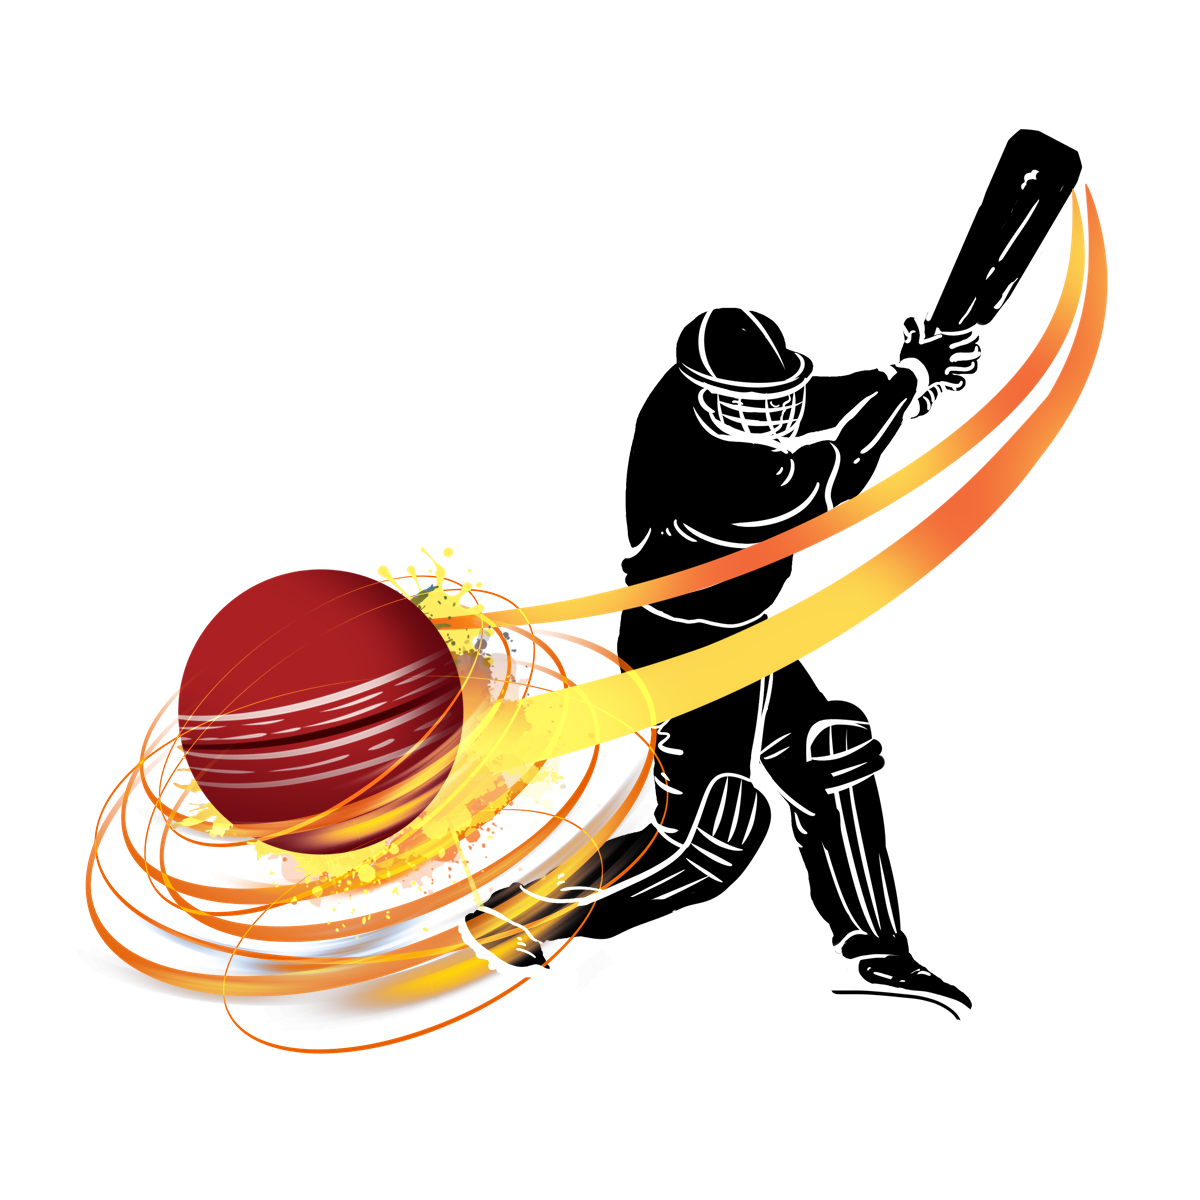 Bitcoin Cricket Betting Sites 2023 - Start Your Safe BTC Cricket Bets